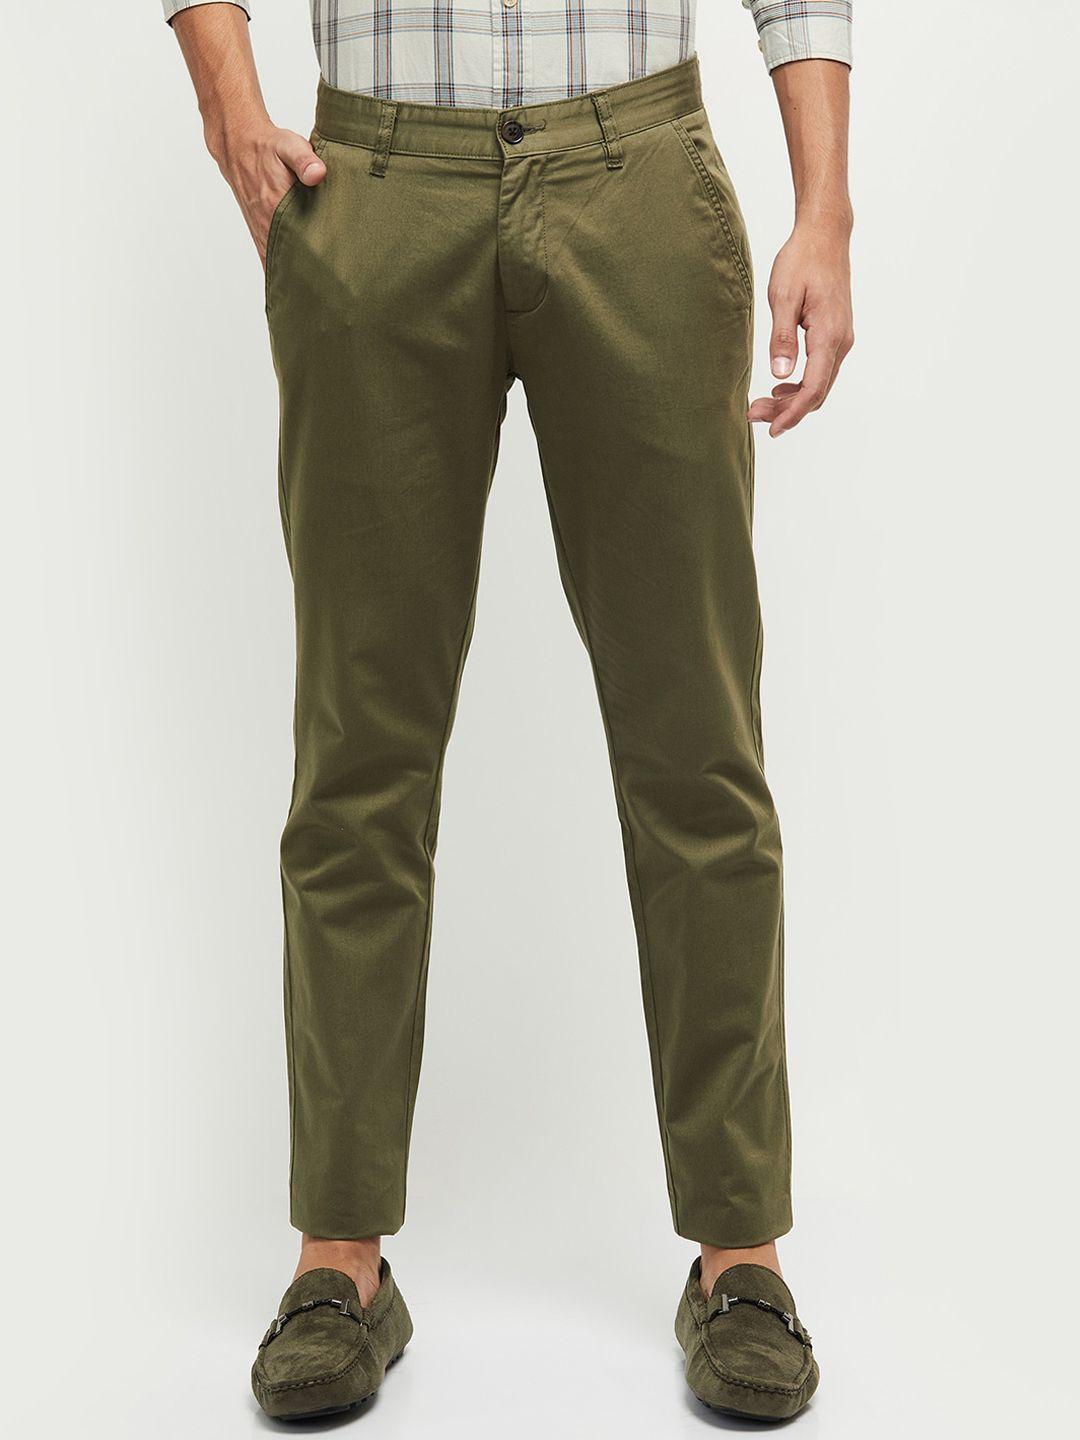 max-men-green-chinos-trousers